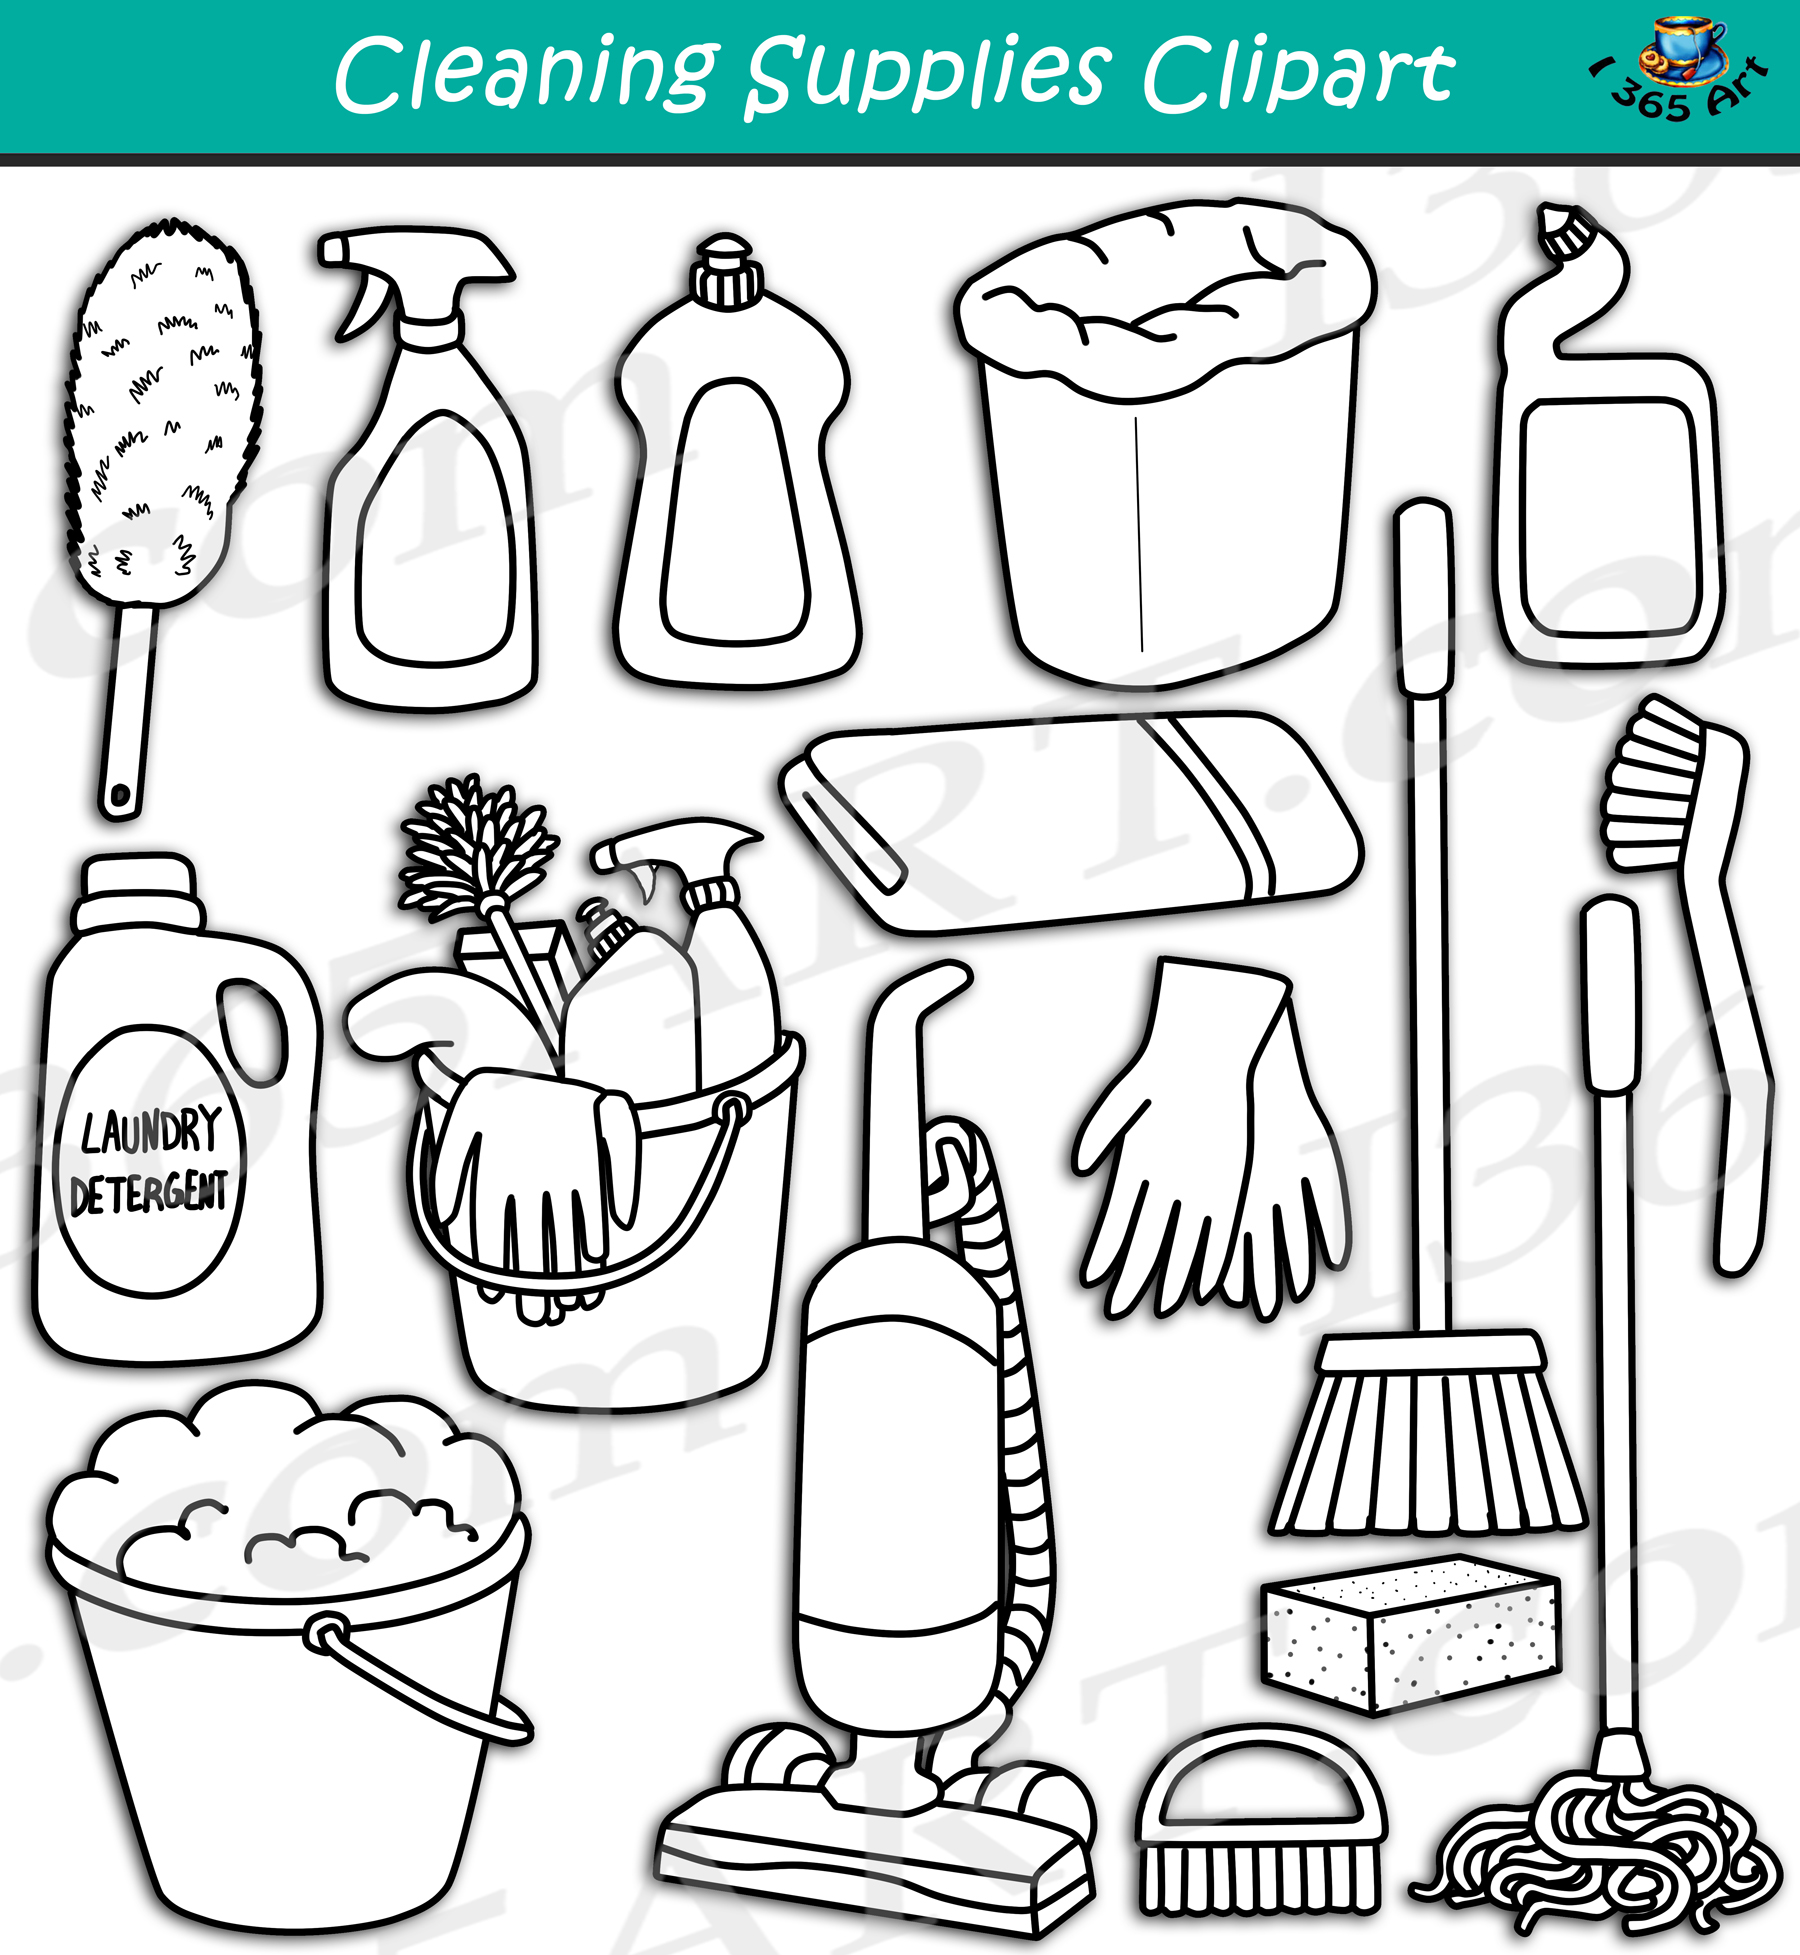 https://clipart4school.com/wp-content/uploads/2022/05/cleaning-supplies-clipart-preview-bw.jpg